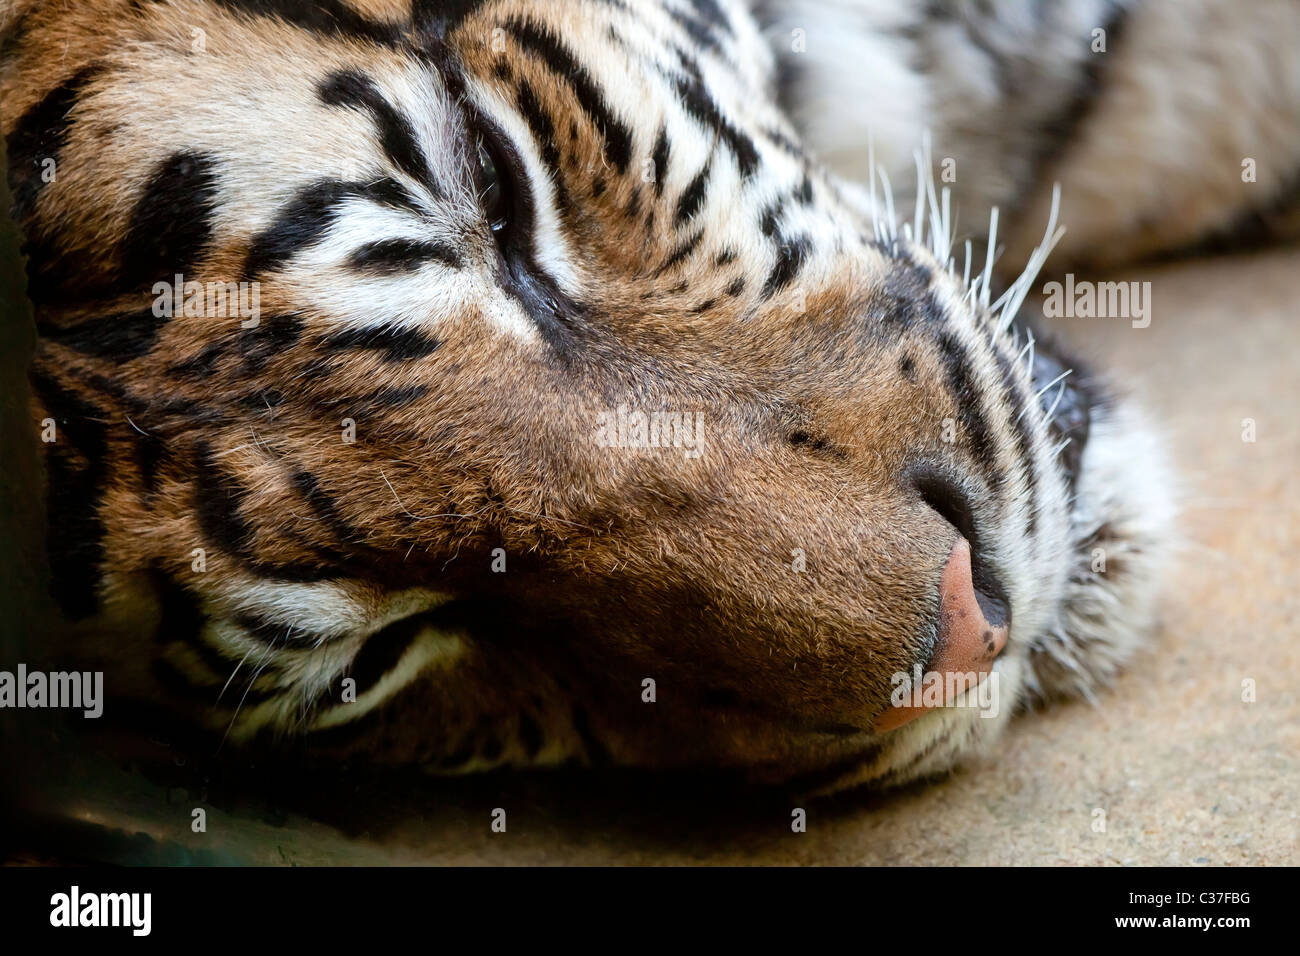 The Bengal tiger lying and resting on the ground Stock Photo